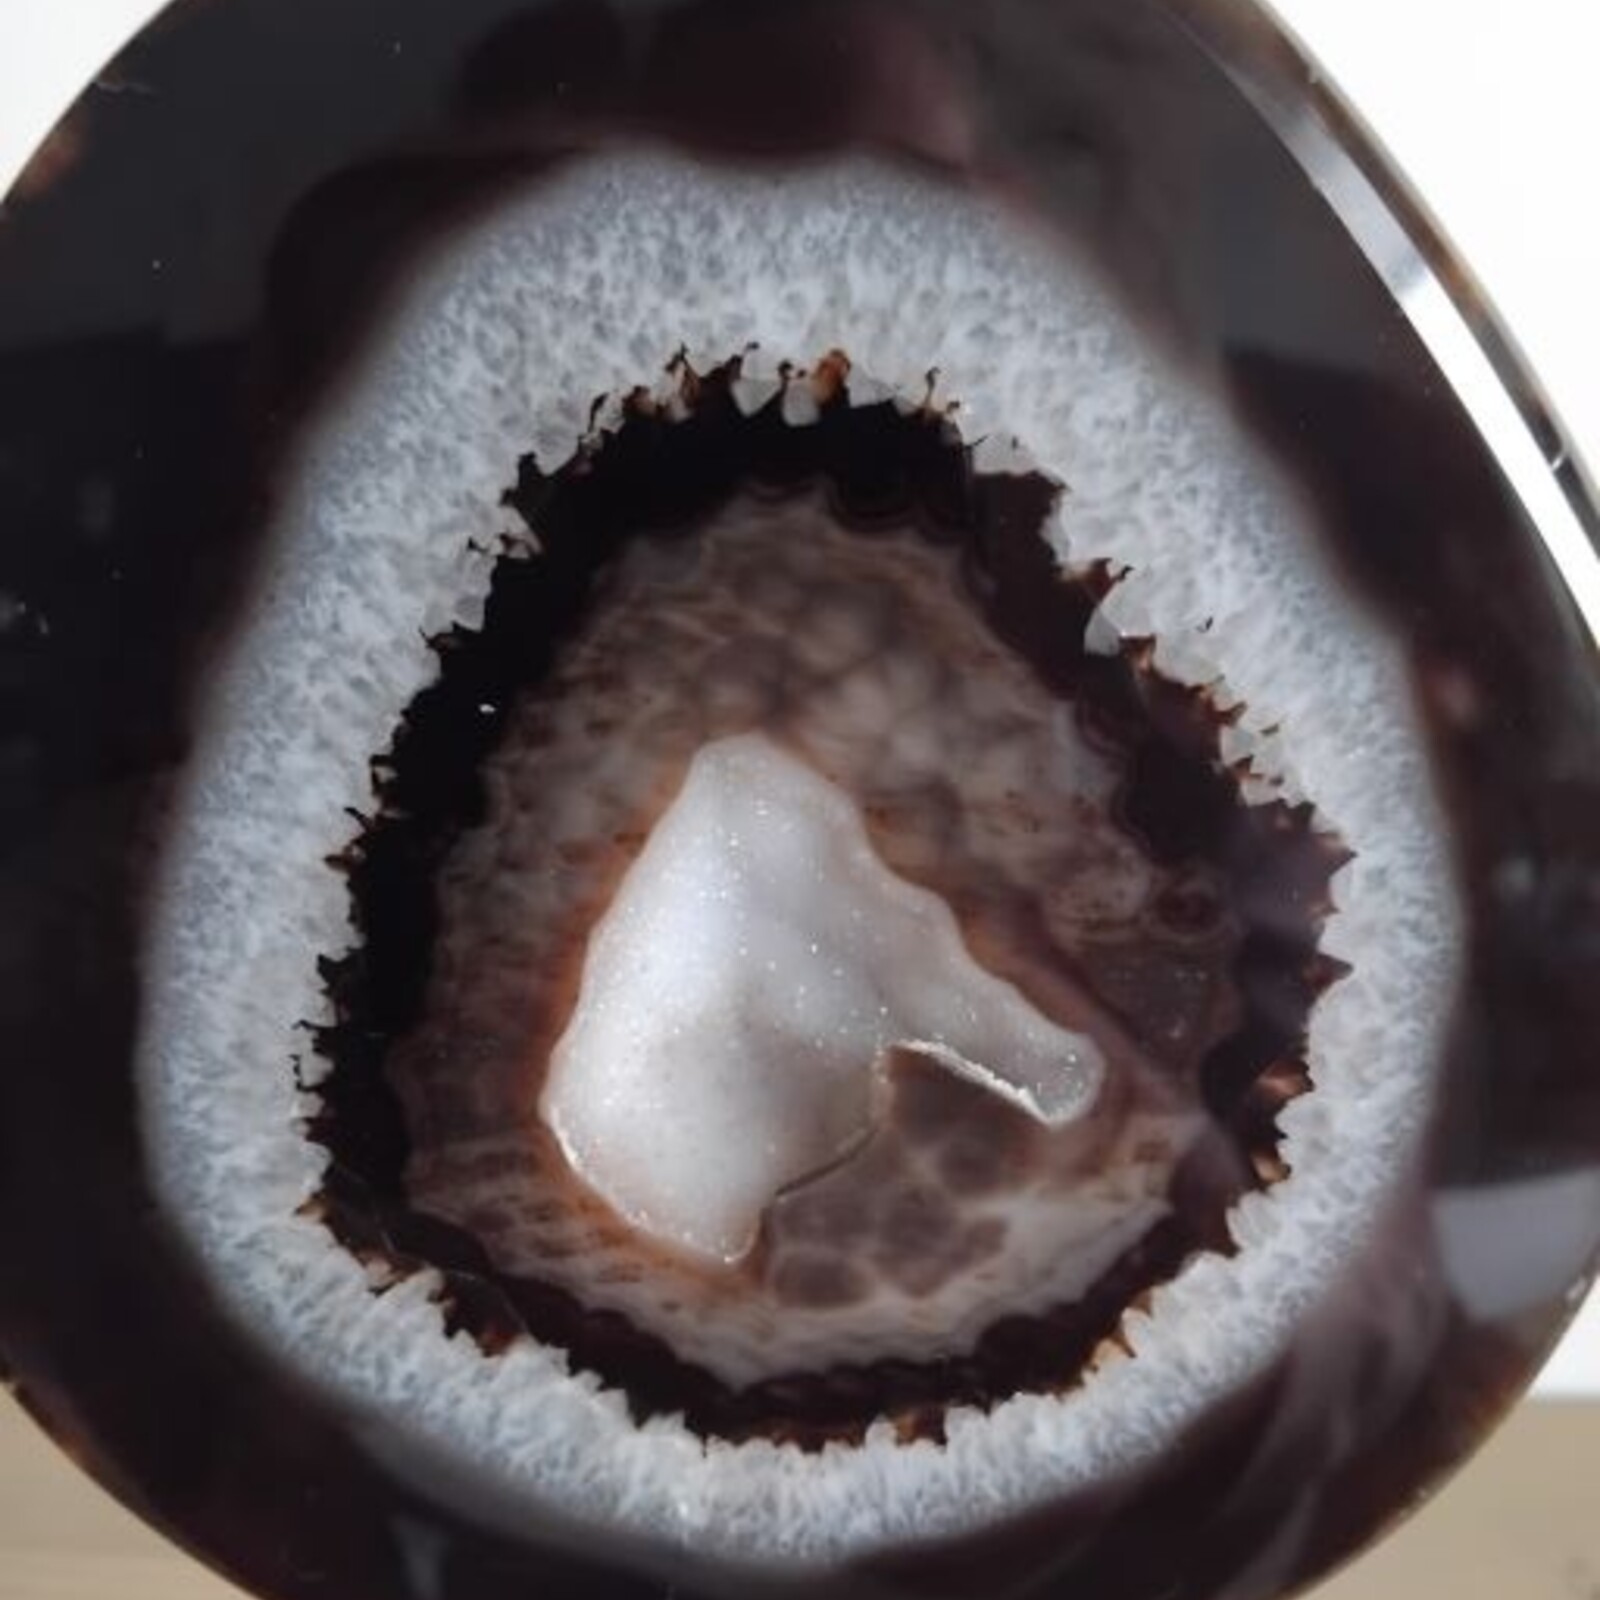 Agate with rock crystal geode on stand